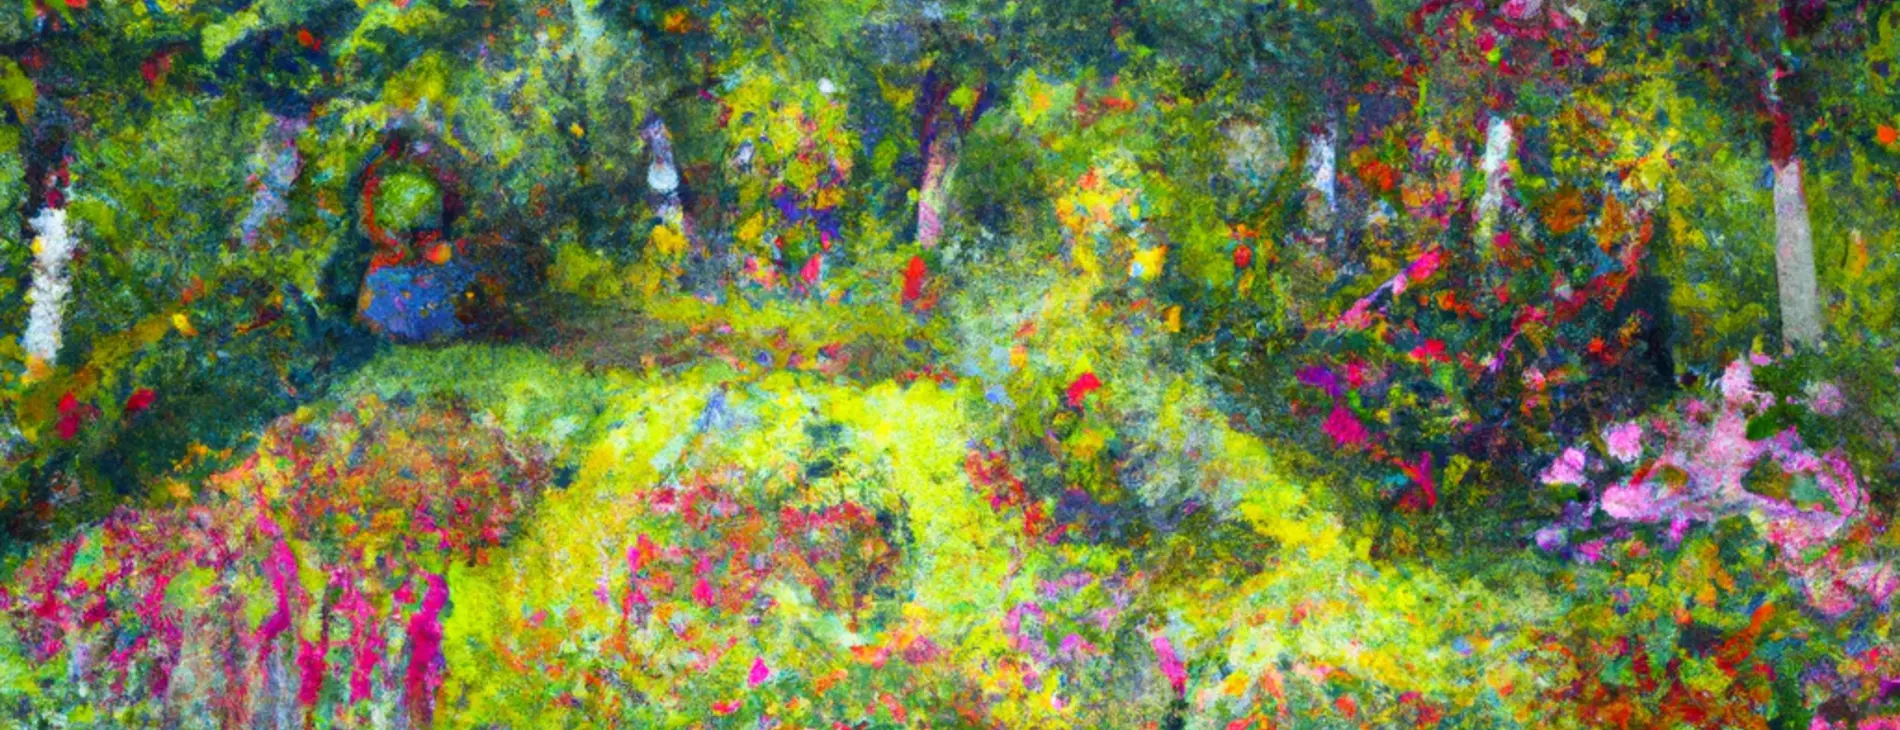 a garden in full bloom - Impressionist painting